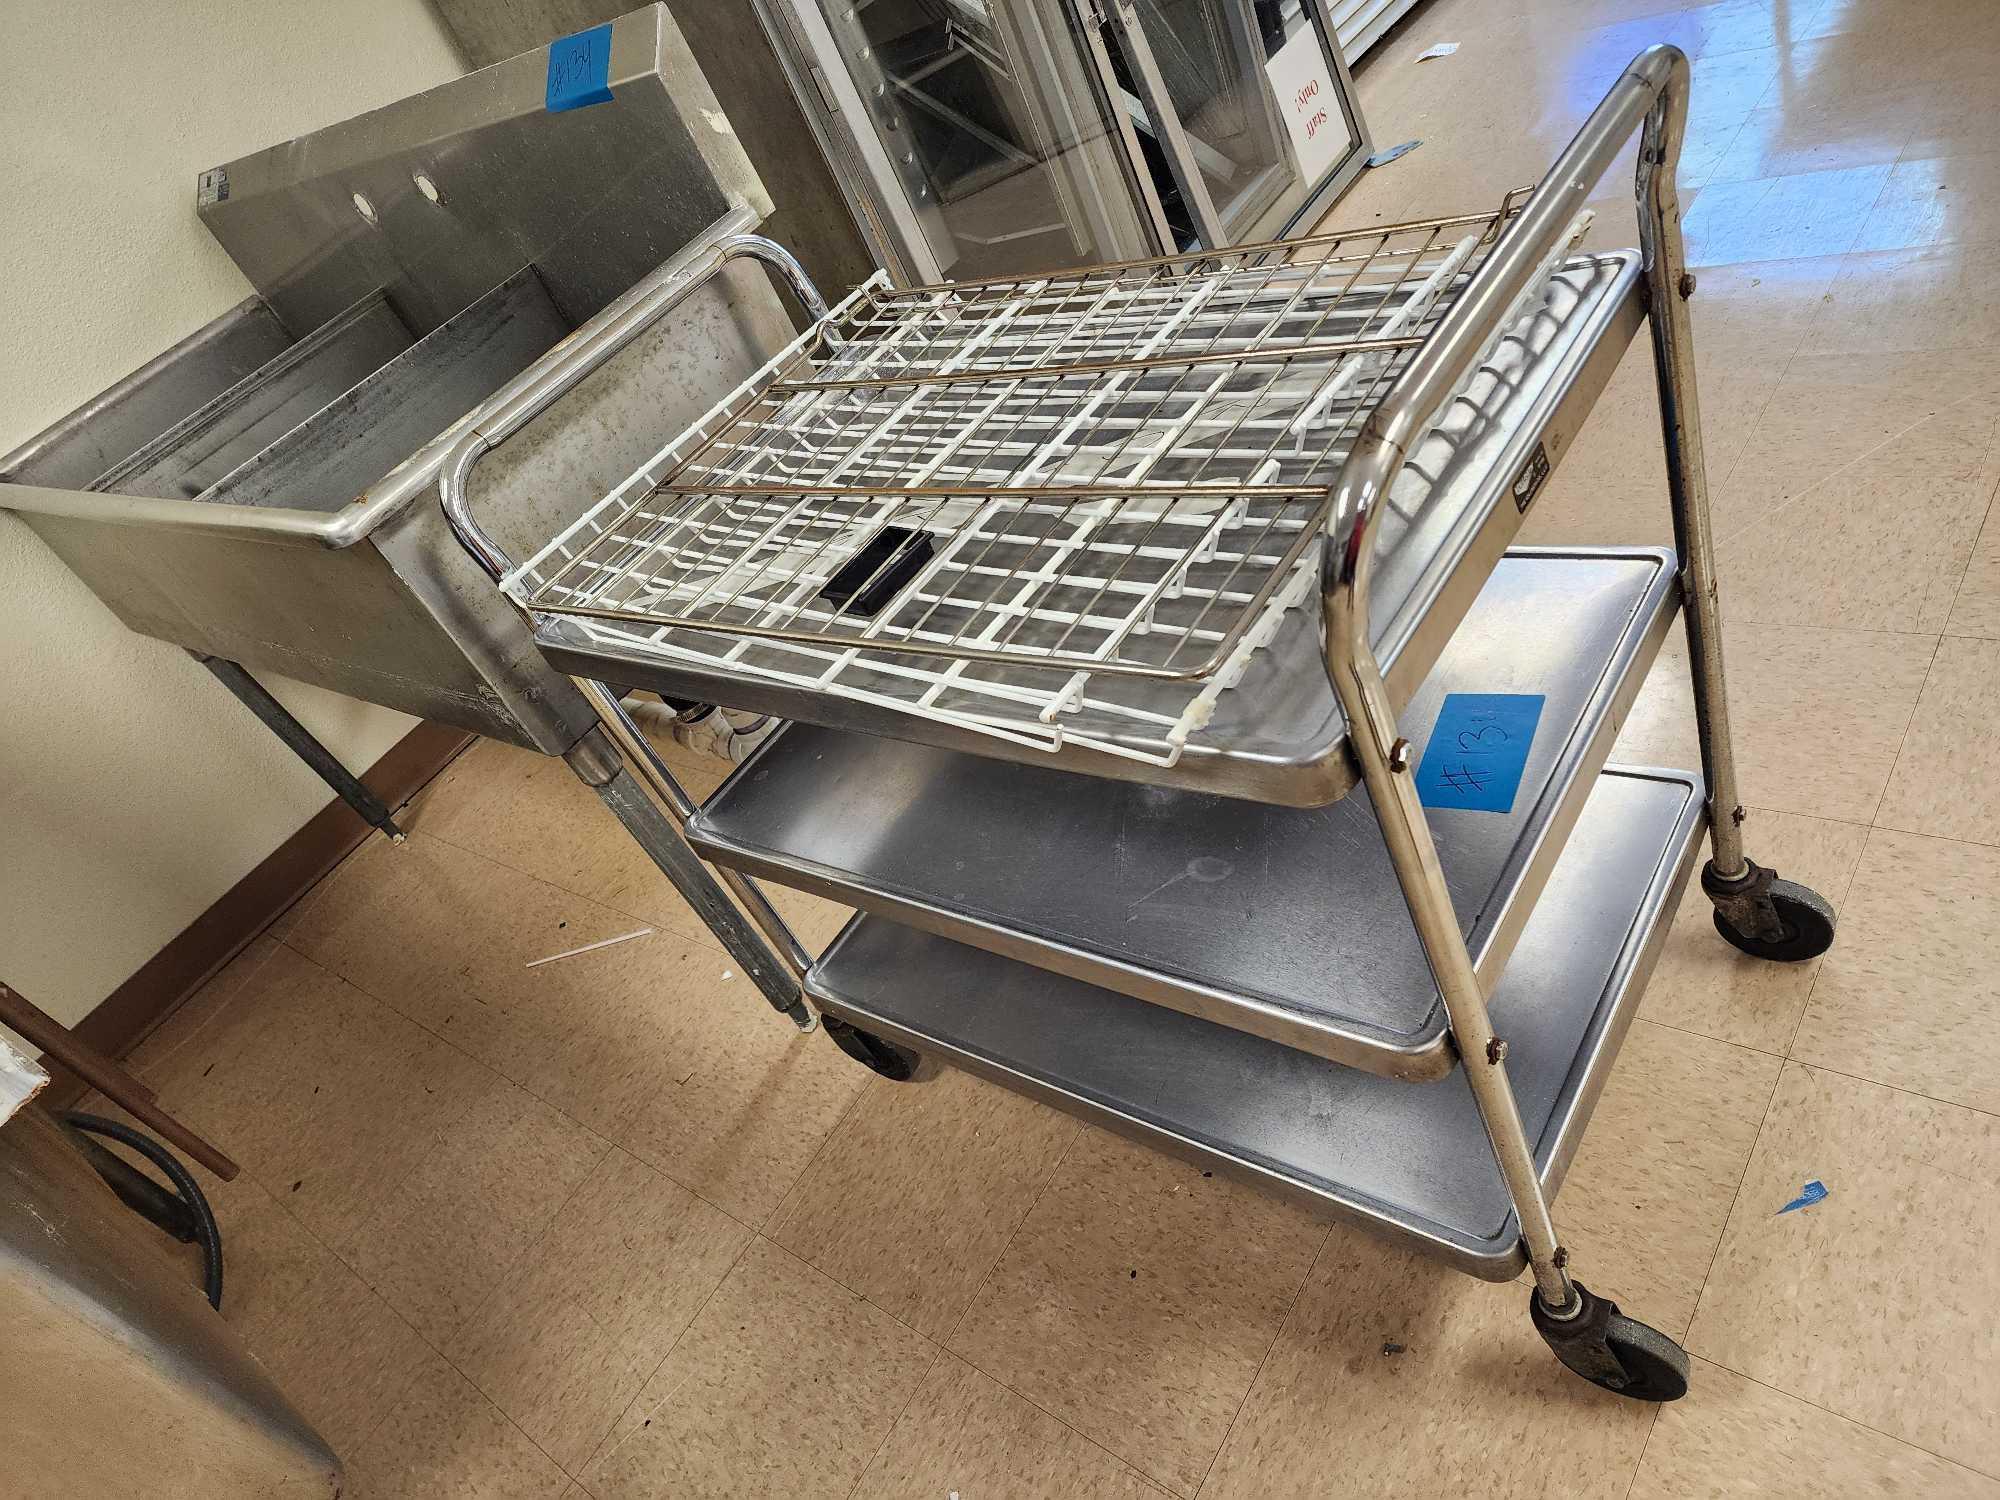 Stainless Steel Utility Cart, Stainless Steel Commercial 3-Compartment Sink, (2) Oven Racks